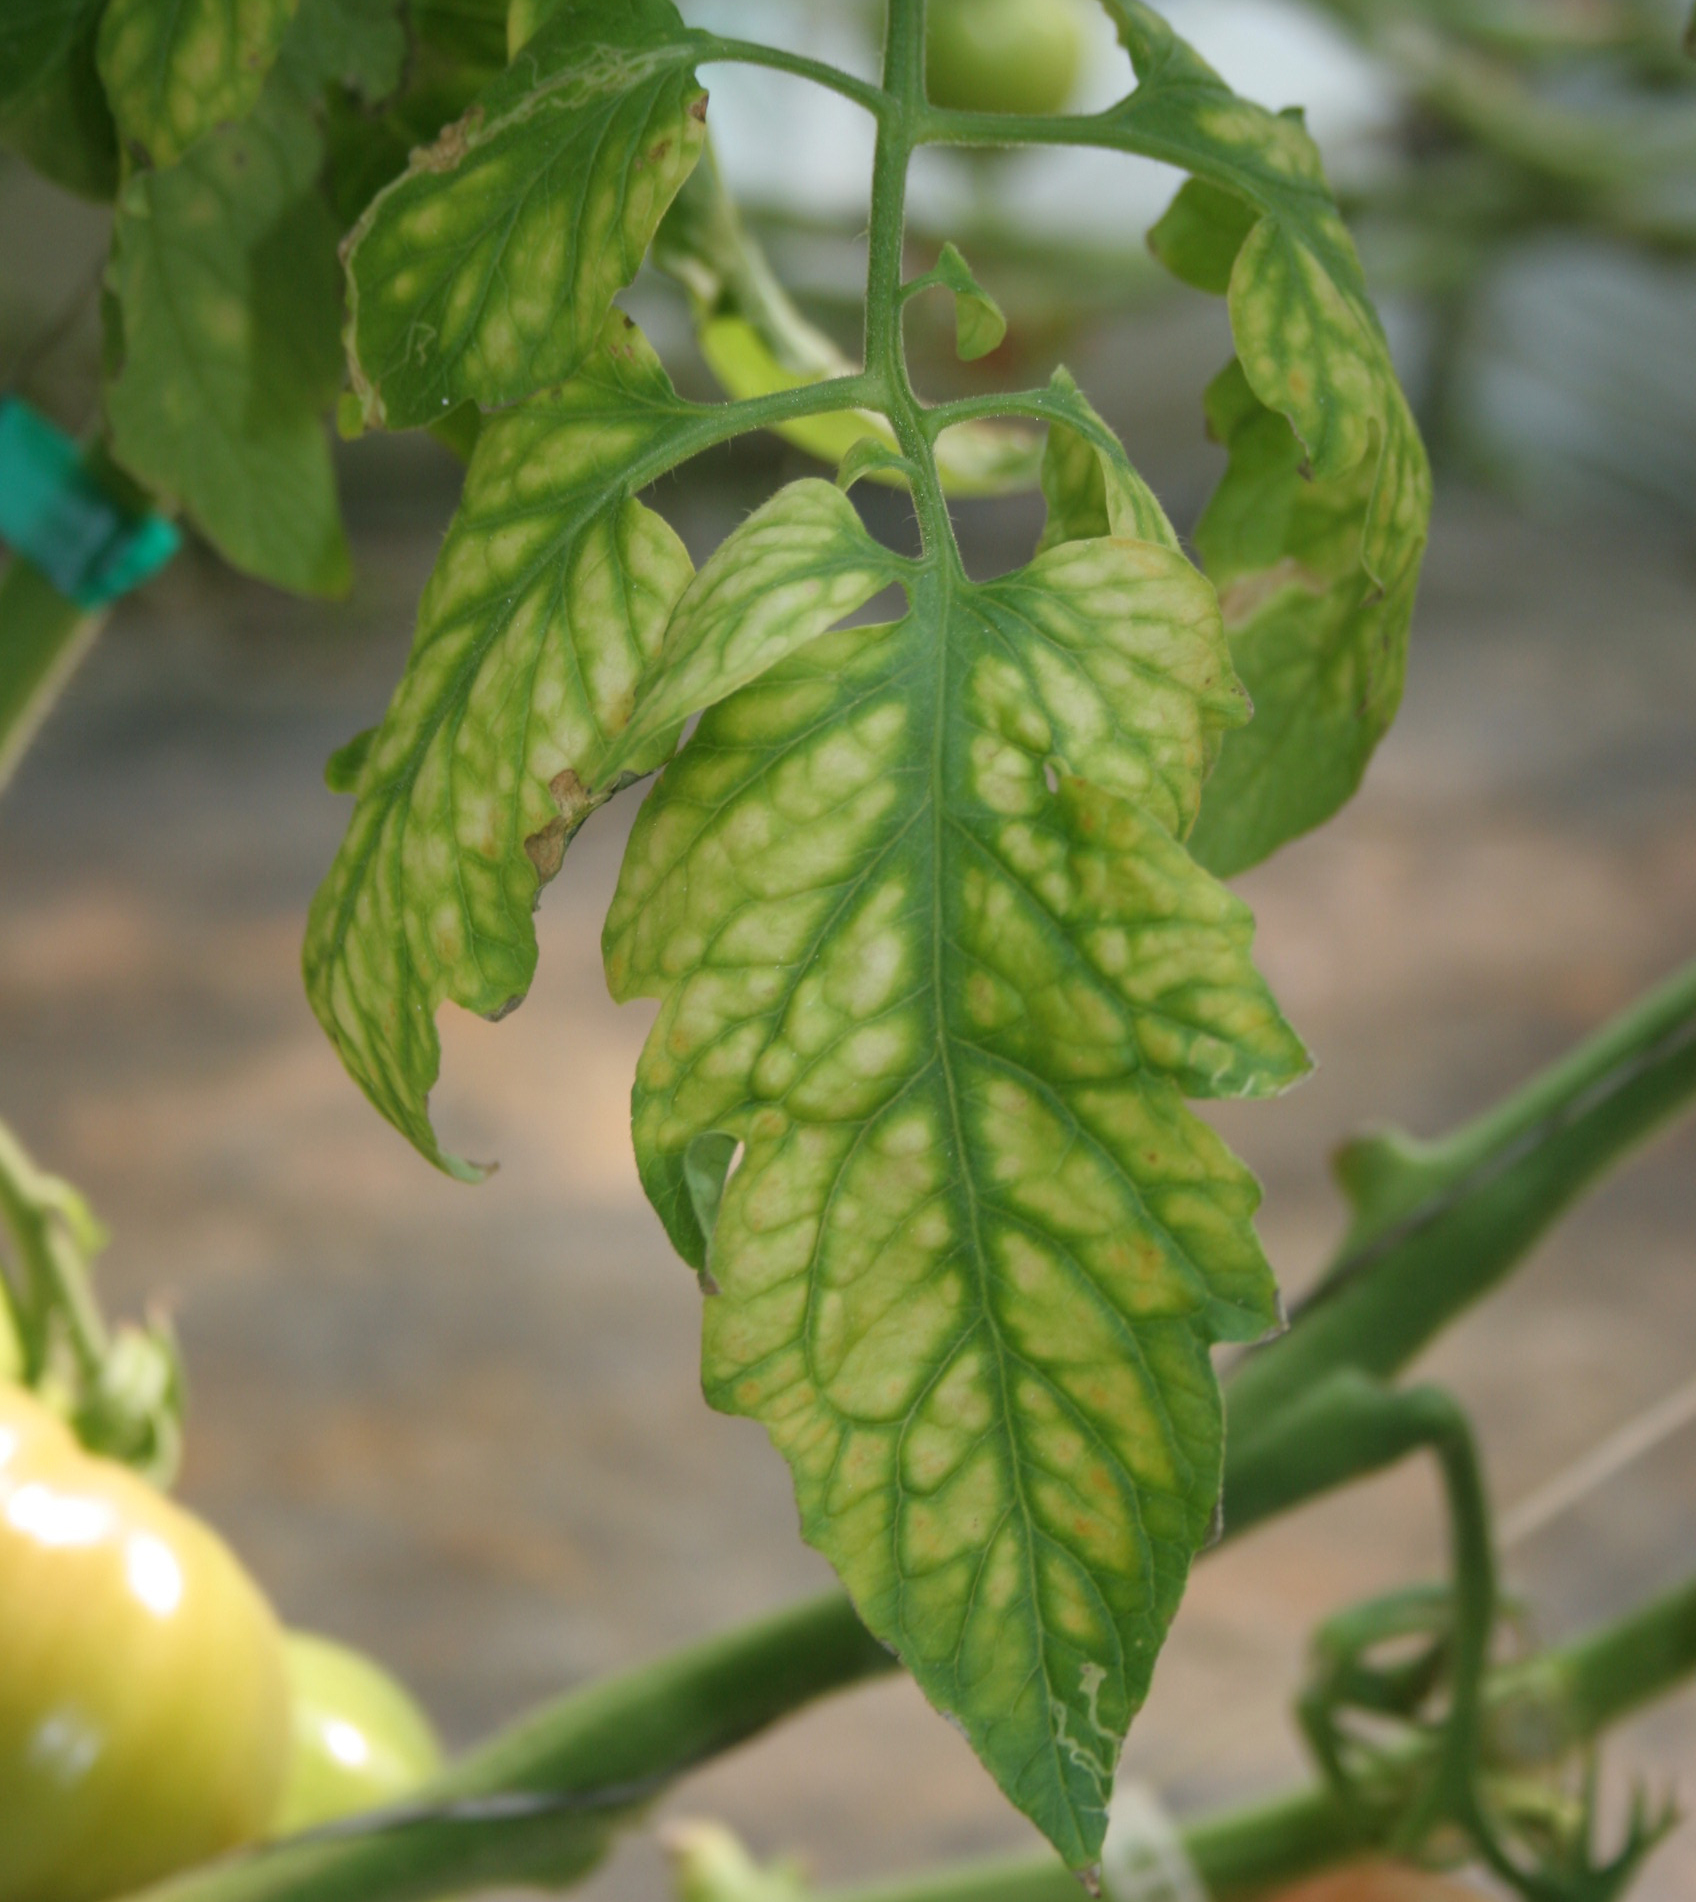 Magnesium deficiency shown on tomato leaves.